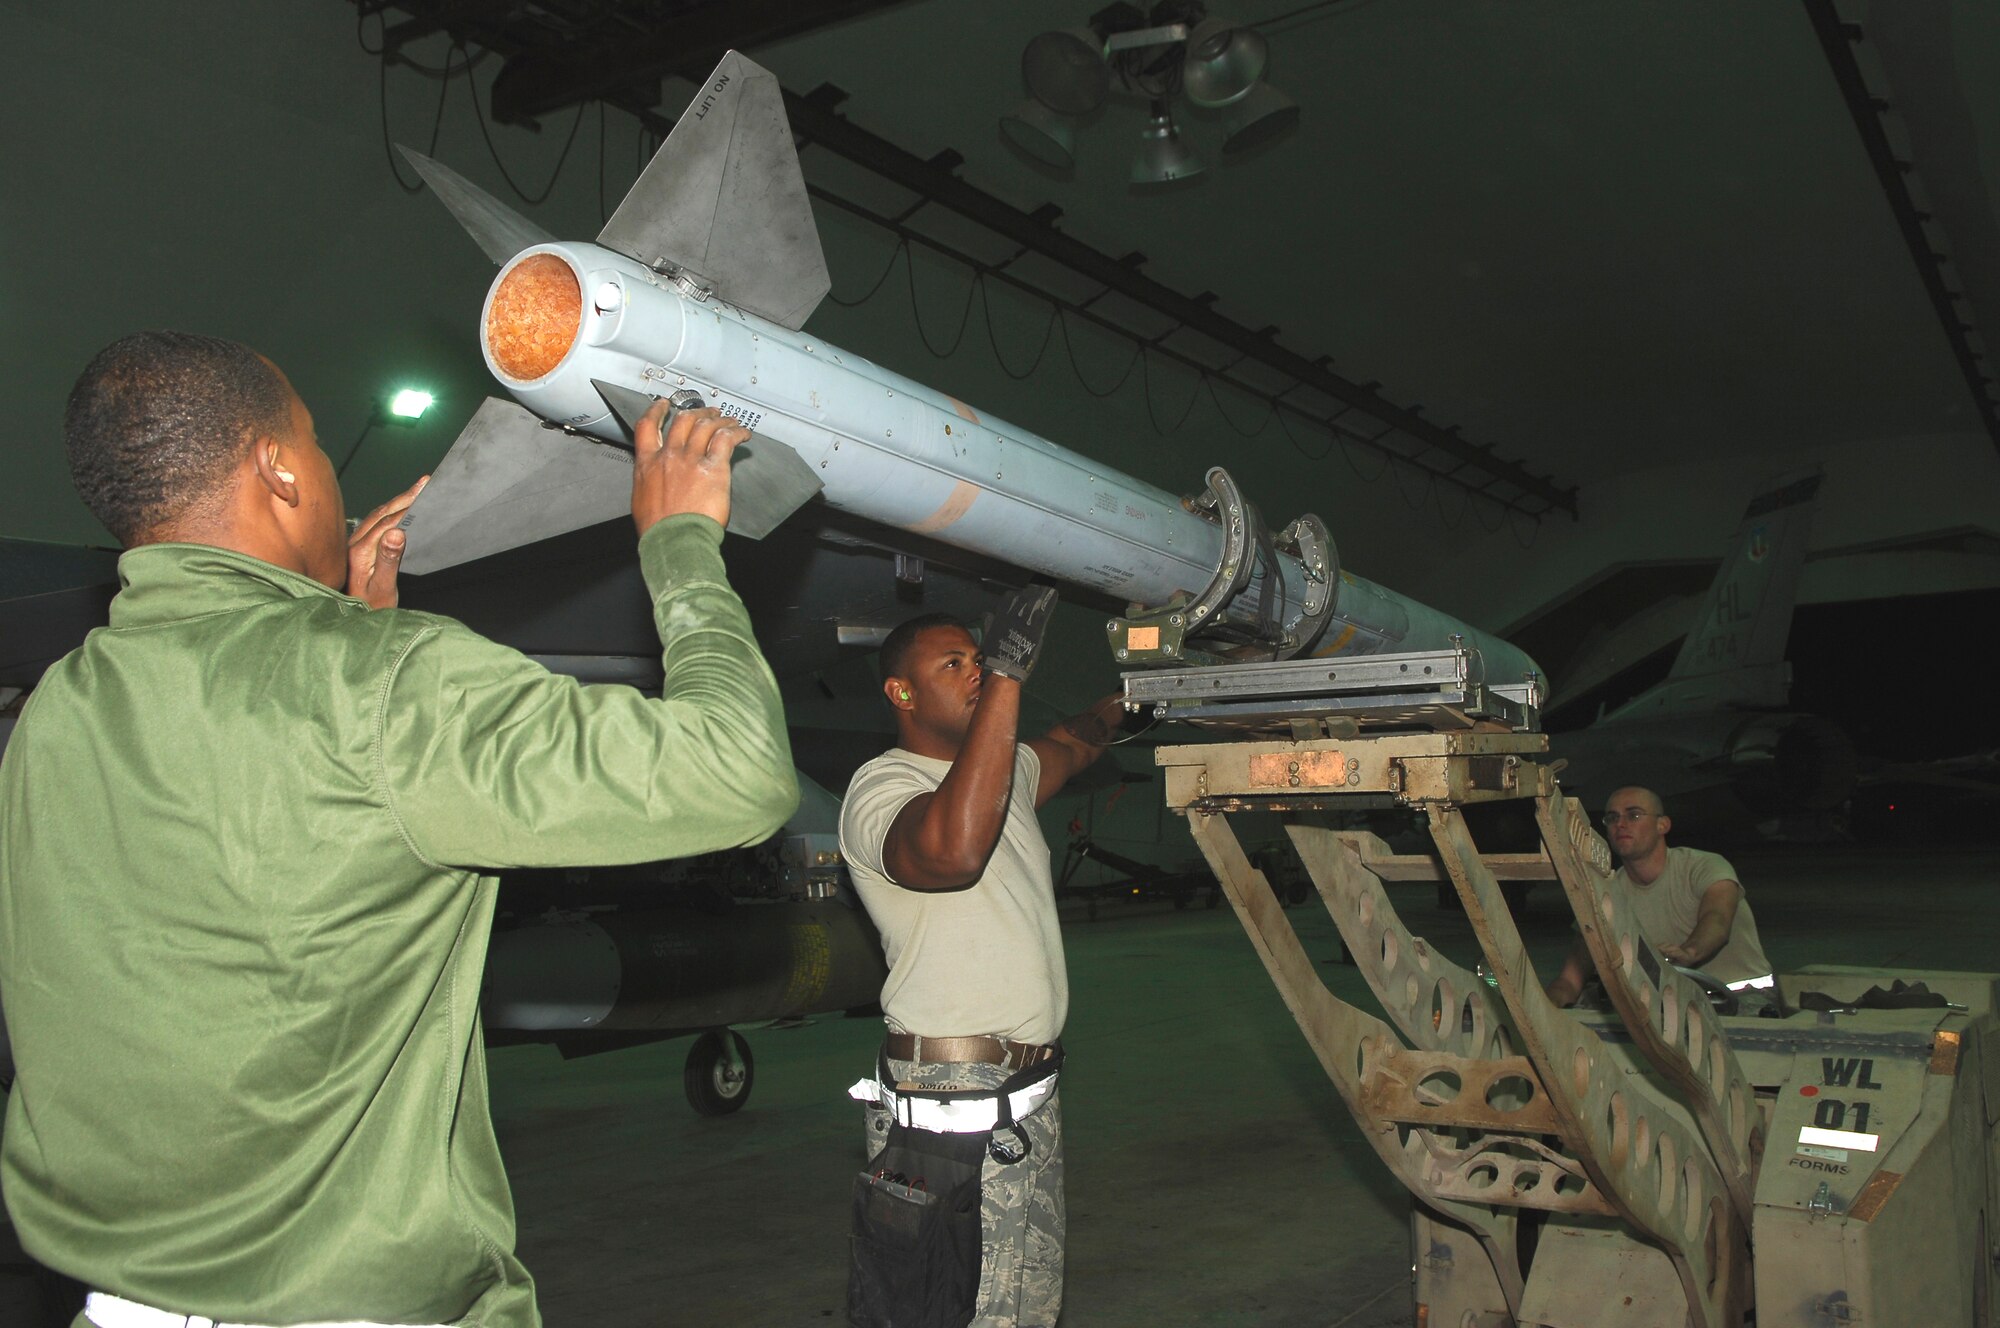 BALAD AIR BASE, Iraq -- From left, Airman 1st Class Ray Williams, Staff Sgt. Corey Smith and Airman 1st Class John Wheatley, all armament systems specialists assigned to the 332nd Expeditionary Aircraft Maintenance Squadron Viper Aircraft Maintenance Unit, load a missile onto the wing of an F-16 Fighting Falcon here, March 13. Each crew is comprised of three individuals, a supervisor, an assistant and a driver. All three Airmen are deployed from Hill Air Force Base, Utah. (U.S. Air Force photo/ Staff Sgt. Mareshah Haynes)